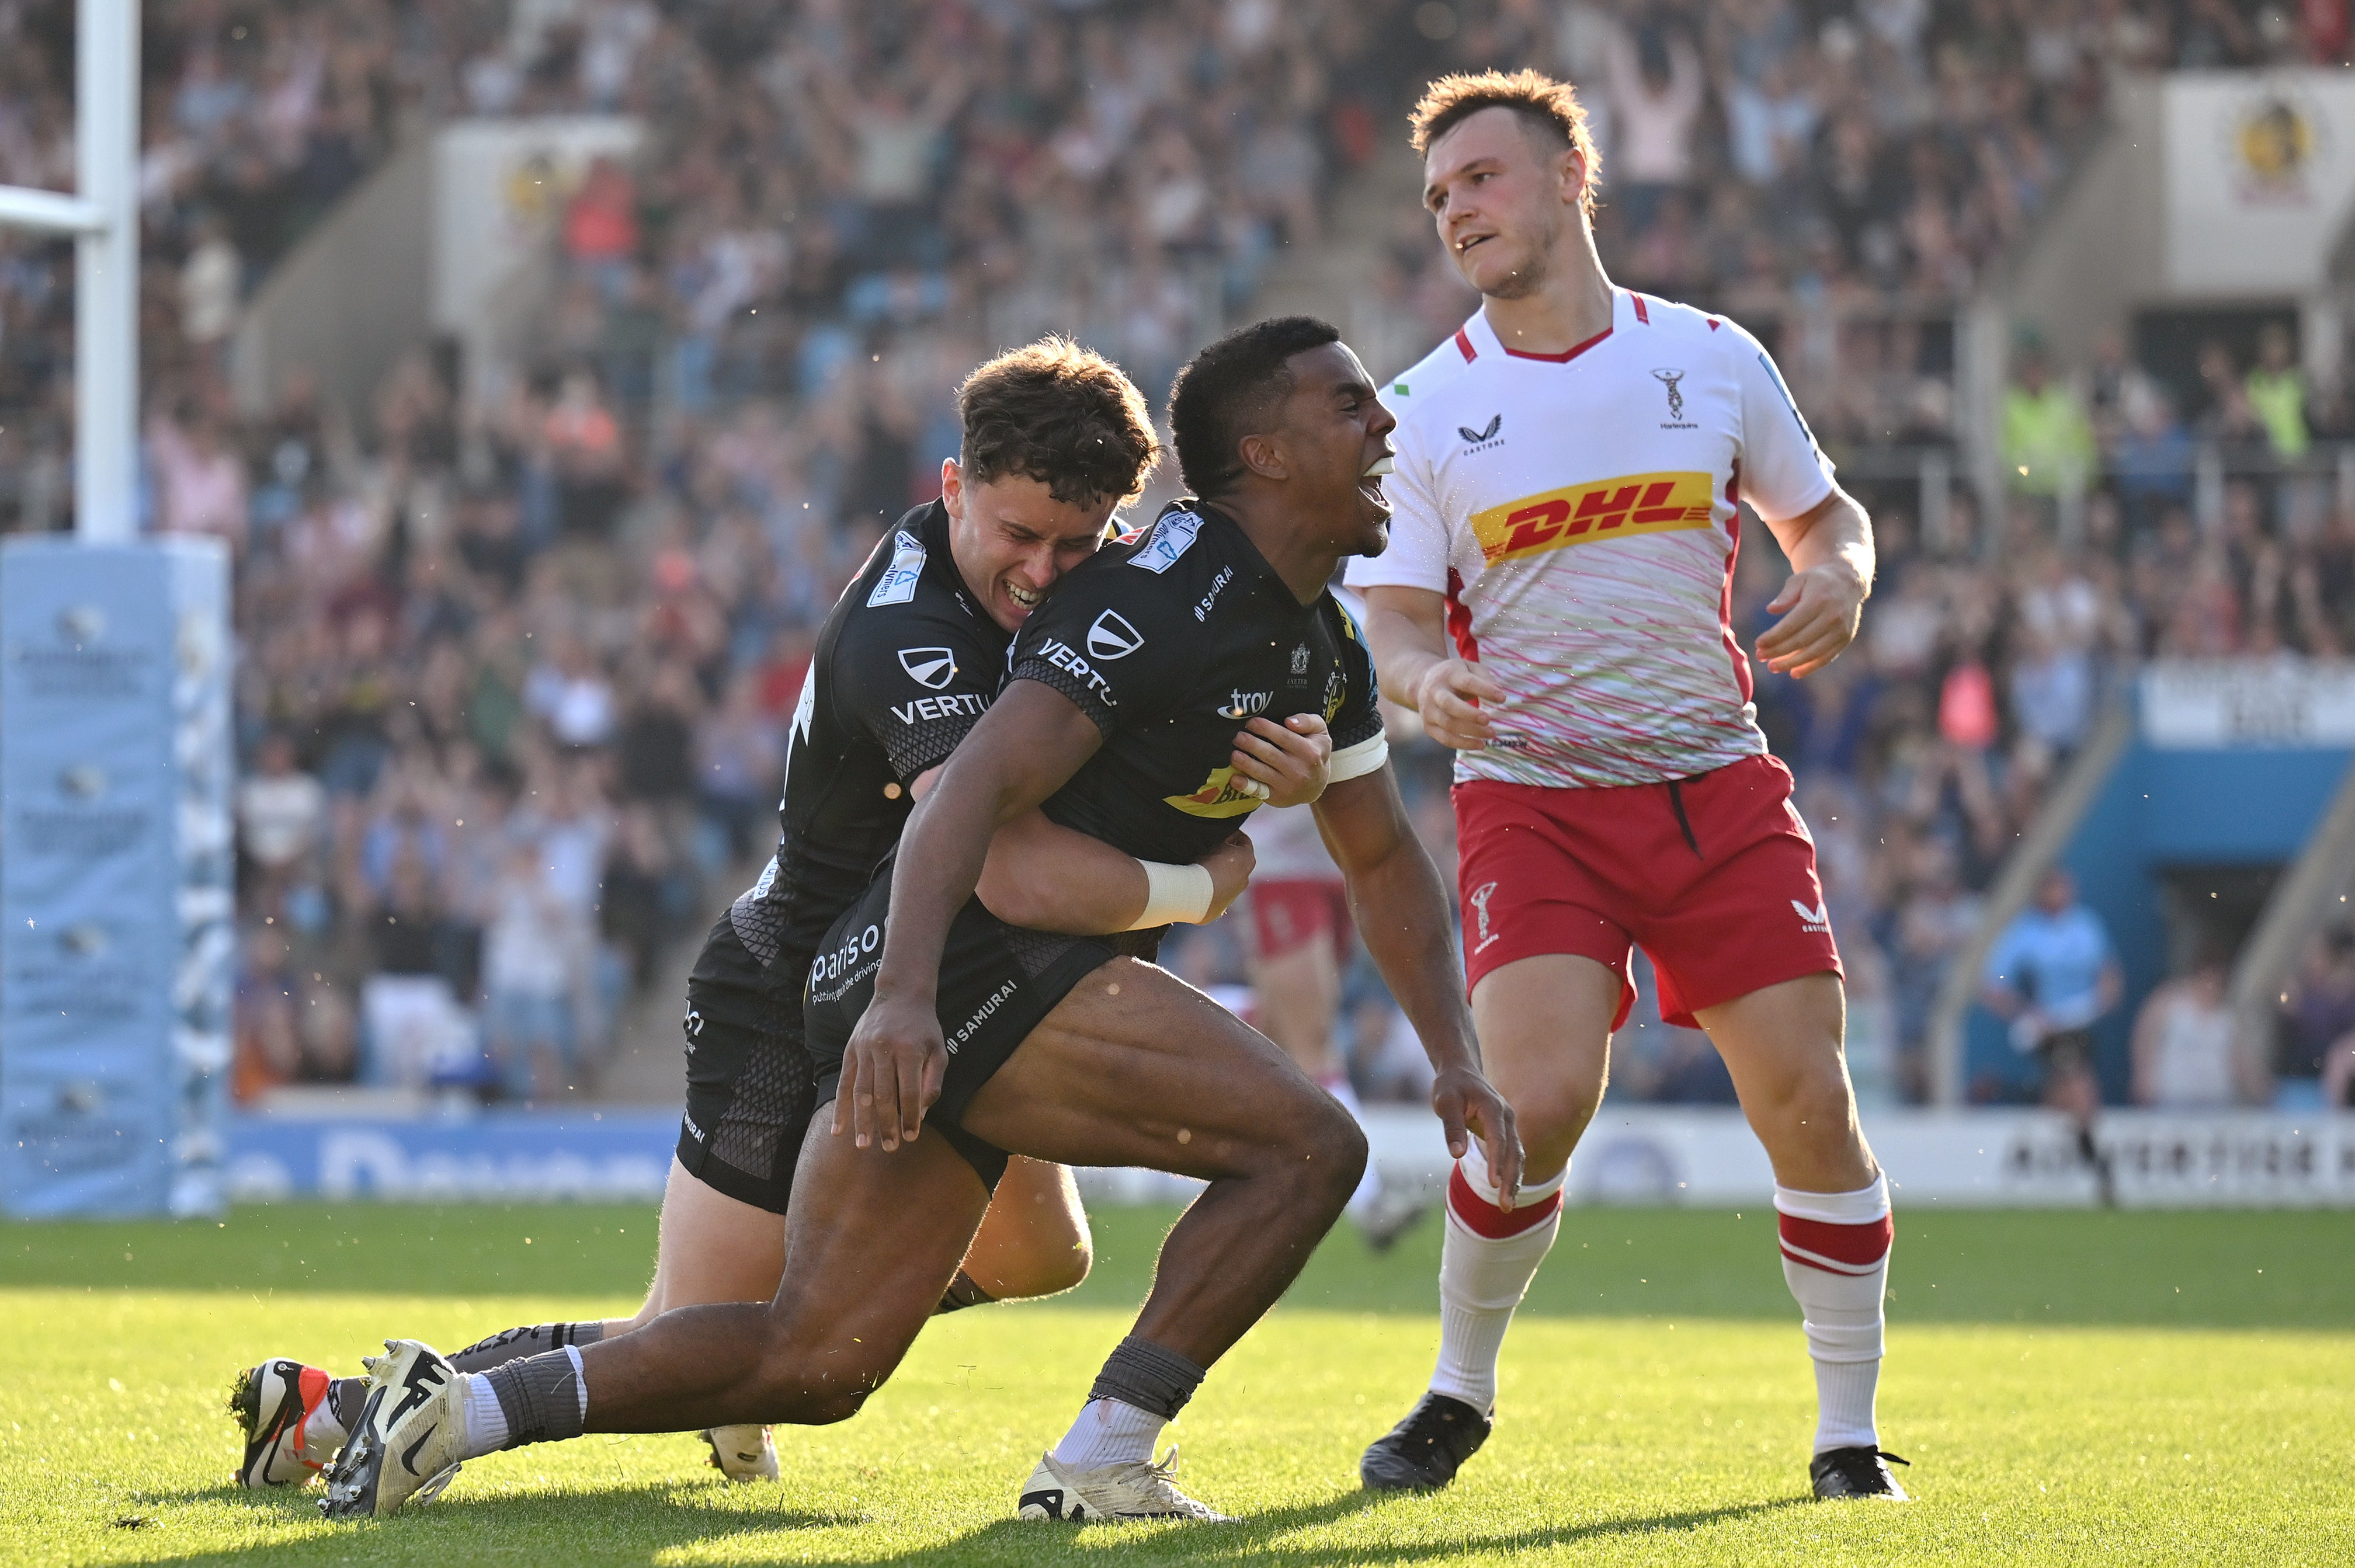 Exeter hope to snatch a play-off place